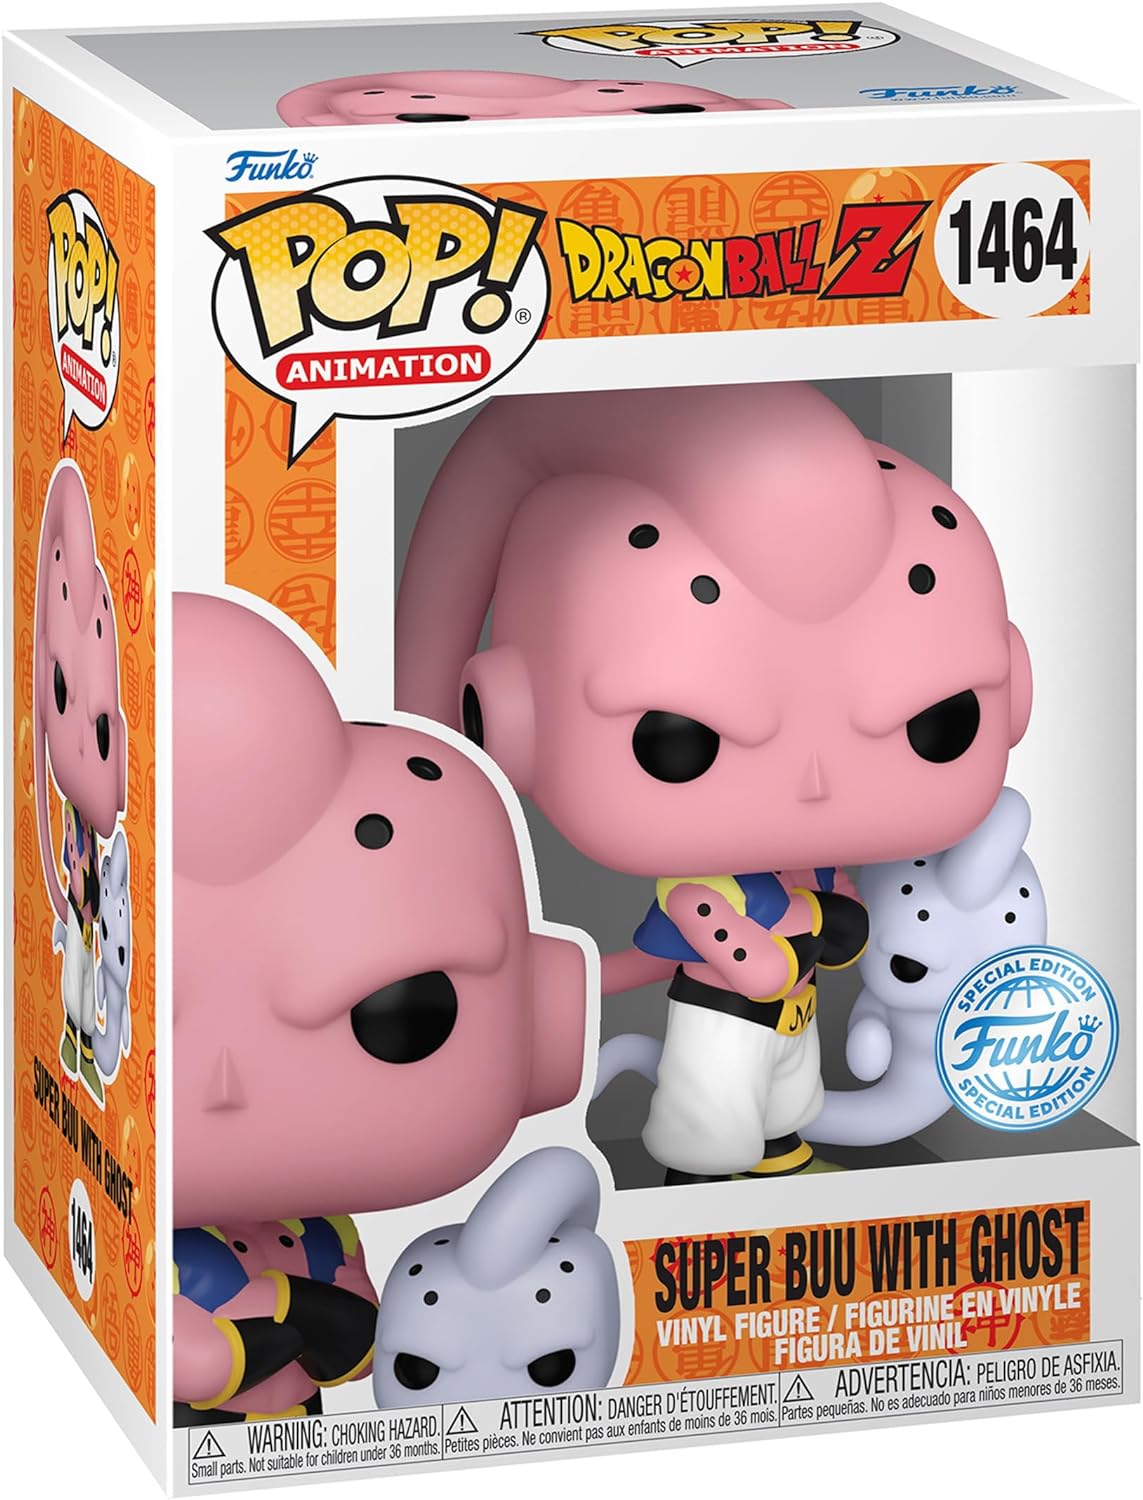 Dragonball Z - Super Buu with Ghost US Exclusive Pop! Vinyl